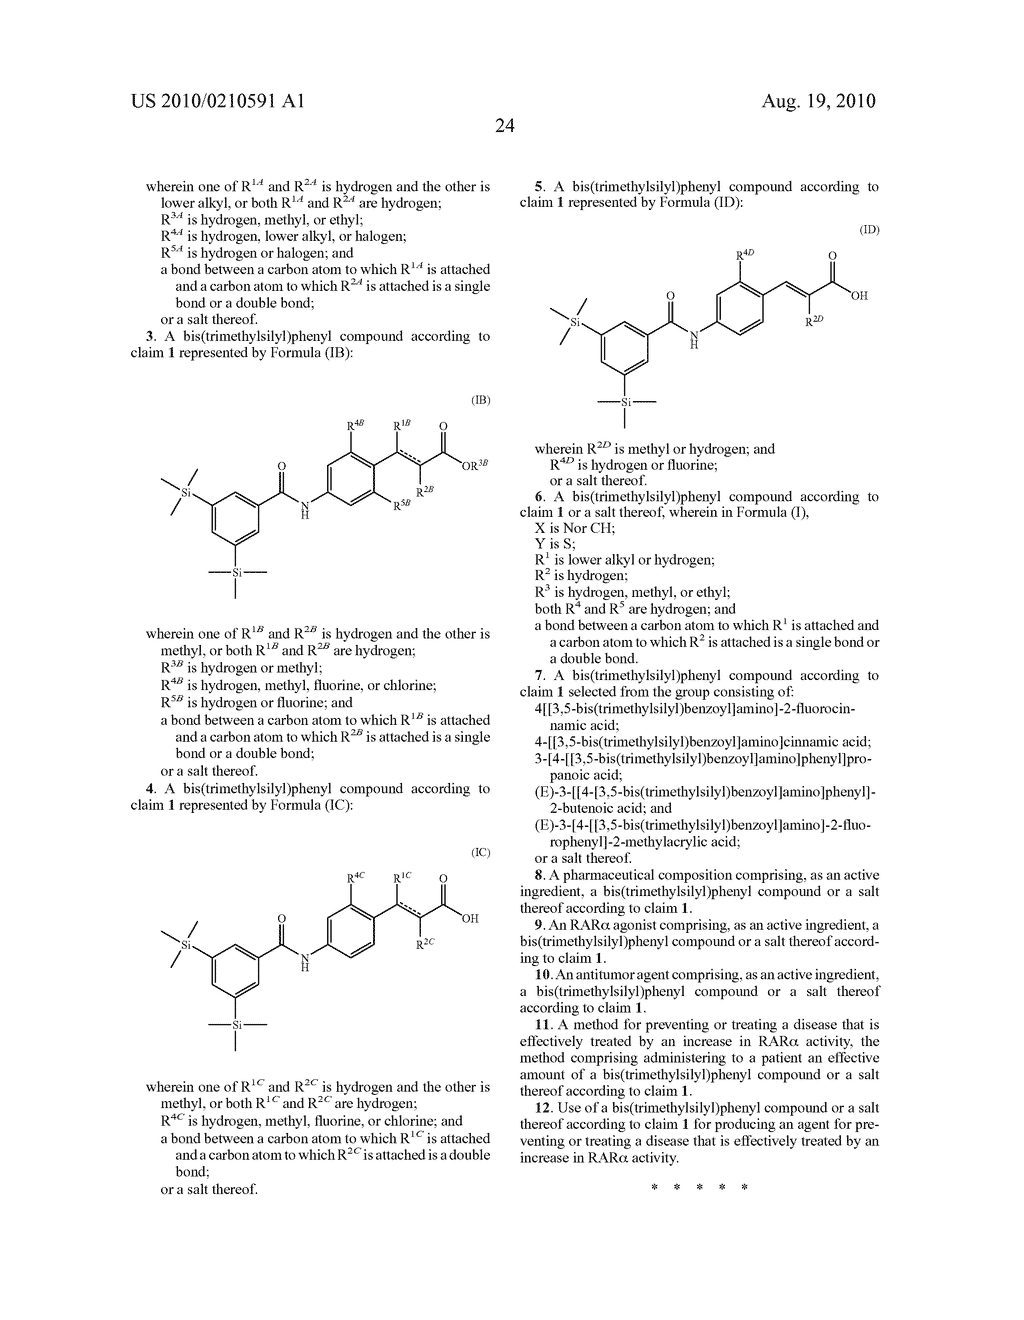 BIS(TRIMETHYLSILYL)PHENYL COMPOUND OR SALT THEREOF, AND USE THEREOF - diagram, schematic, and image 27